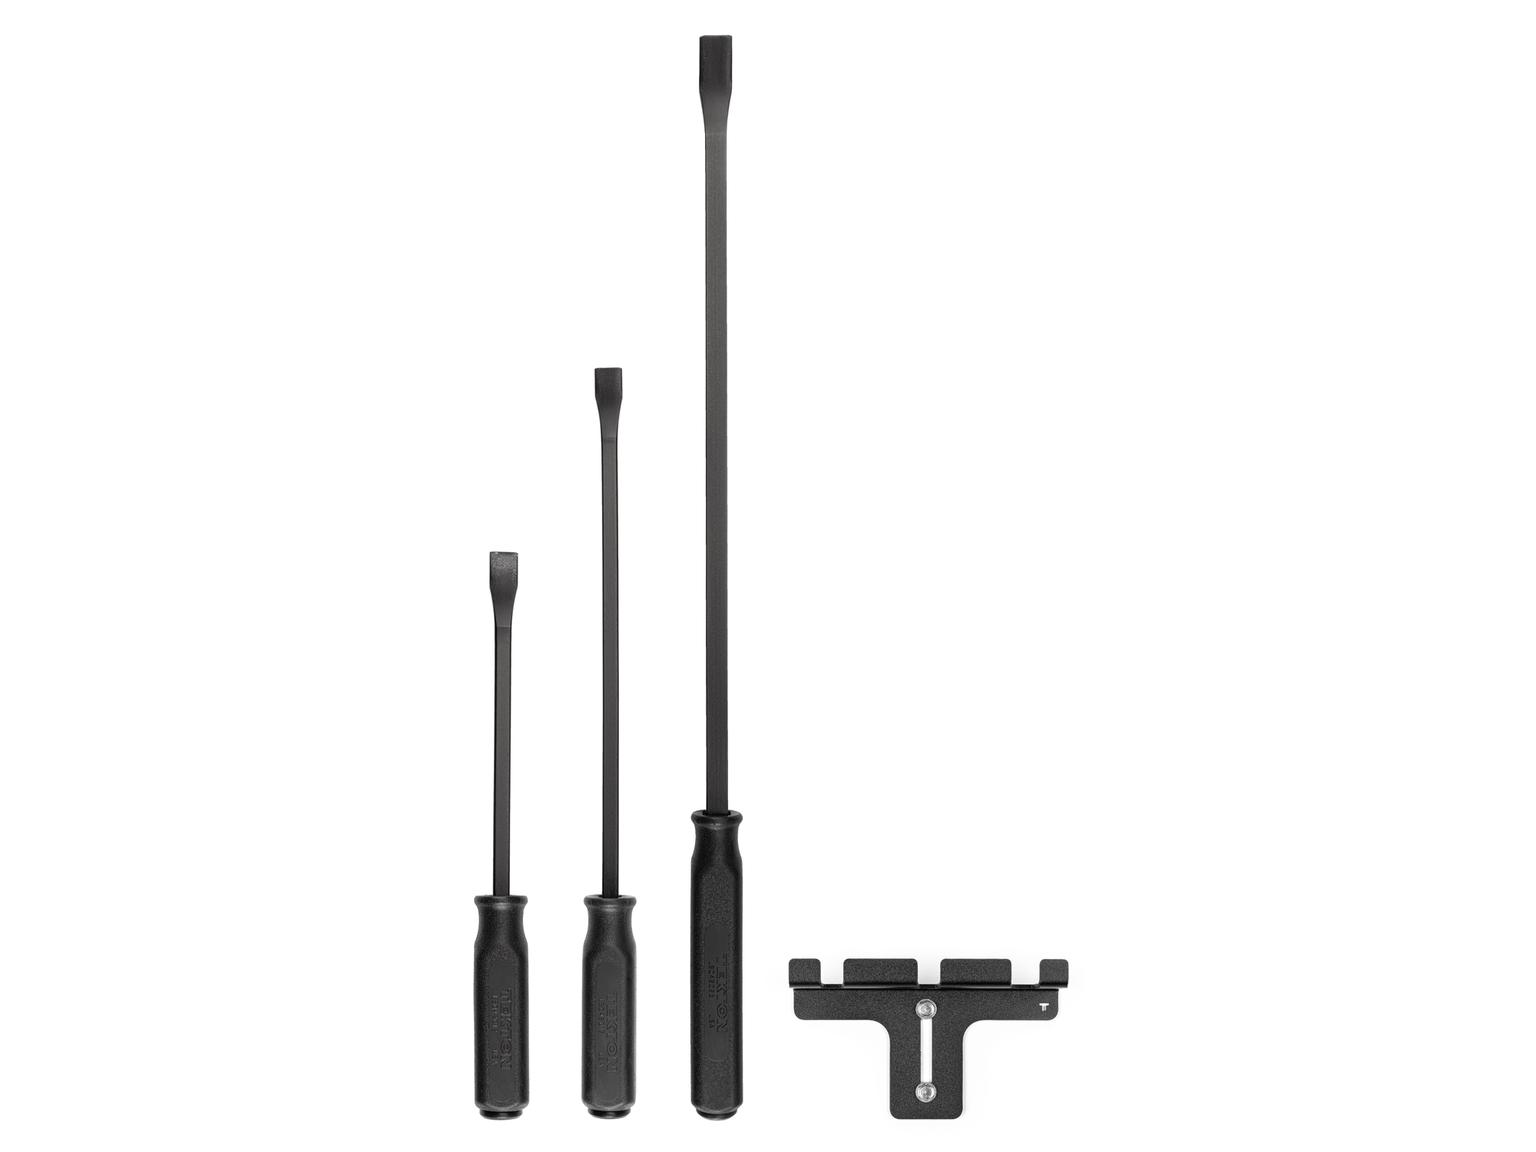 TEKTON LSQ96503-T Angled End Handled Pry Bar Set with Wall Hanger, 3-Piece (12, 17, 25 in.)